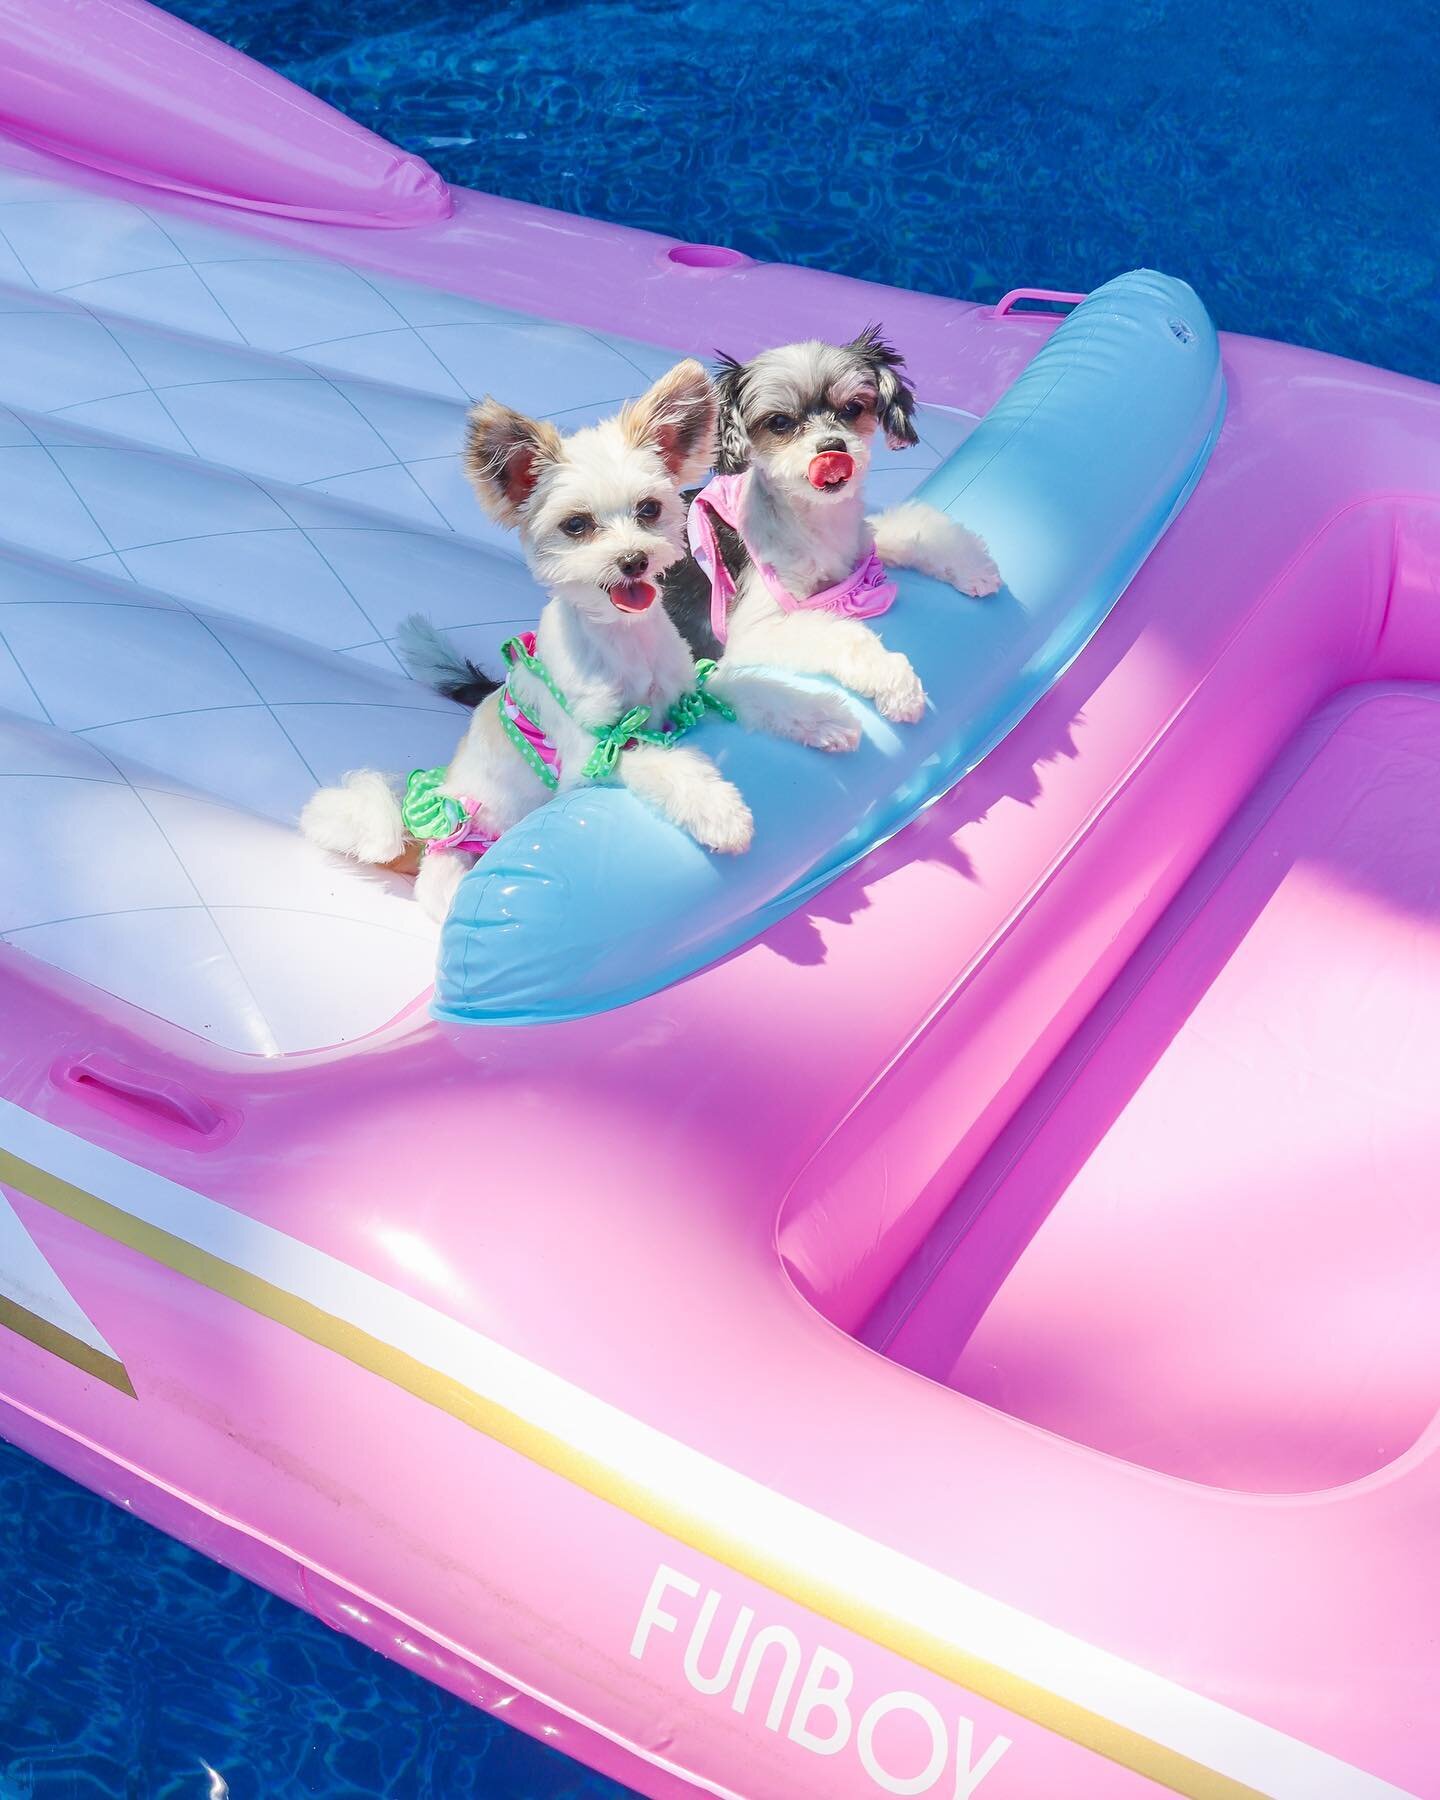 &ldquo;We&rsquo;re floating into Friday&hellip;bring on the margs!&rdquo; - Tinkerbelle and Belle☀️💦🐶 
.
.
.
.
.

#dogsofnyc #dogsofthehamptons #hamptons #thehamptons #dogsbeingbasic #betches #cuteanimals #cutenessoverload #summervibes #fridayfeeli